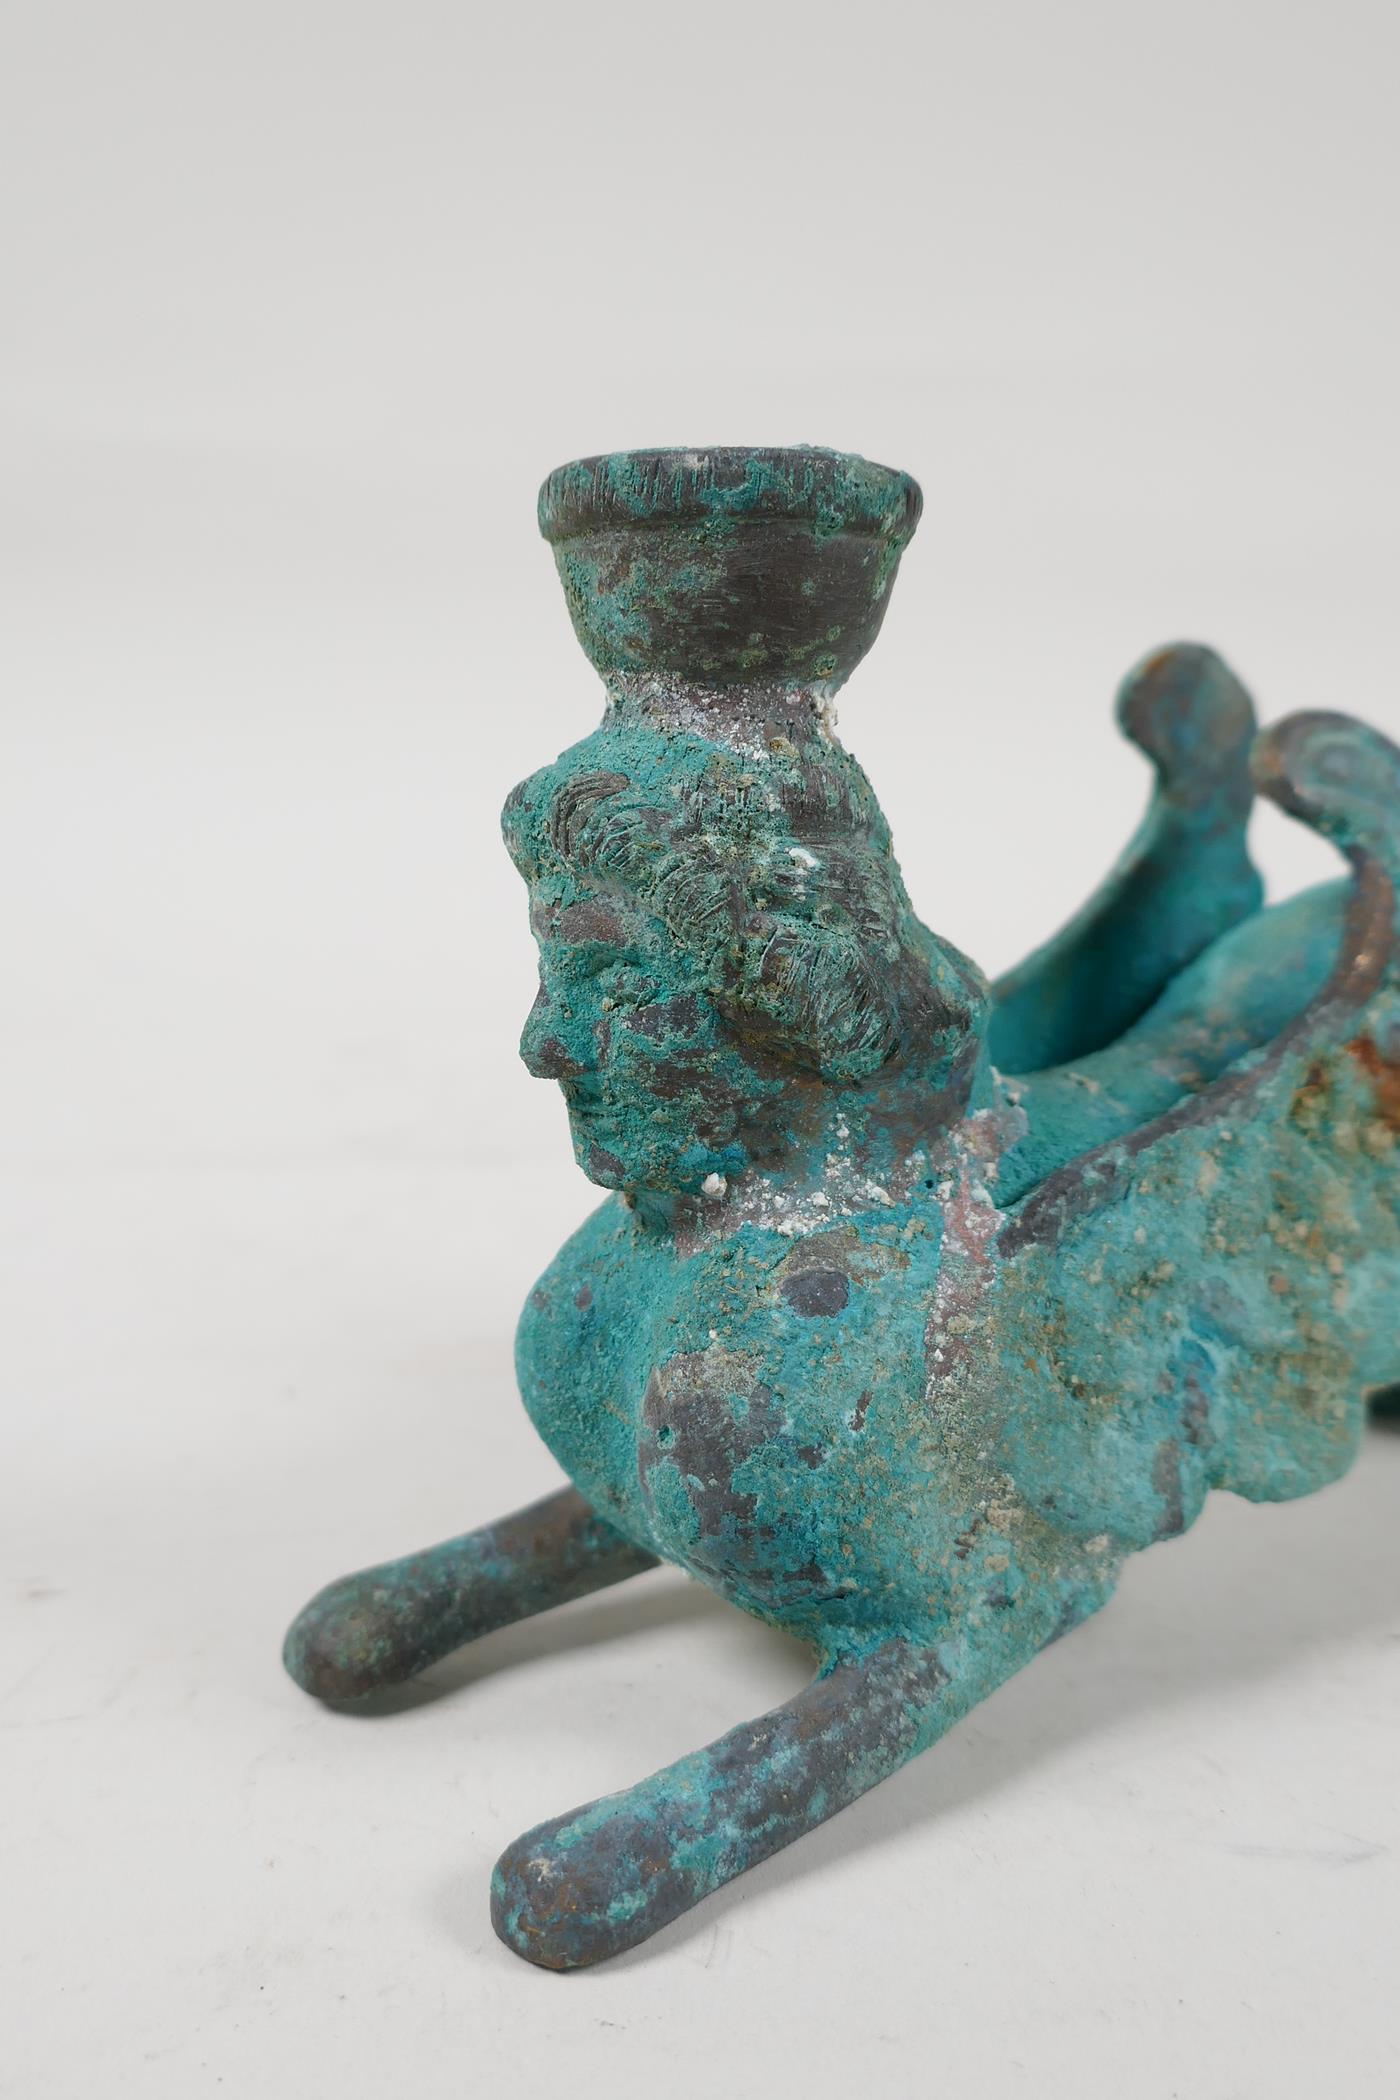 An antique bronze candlestick in the form of a Harpy, with verdigris patina, 5½" long - Image 5 of 5